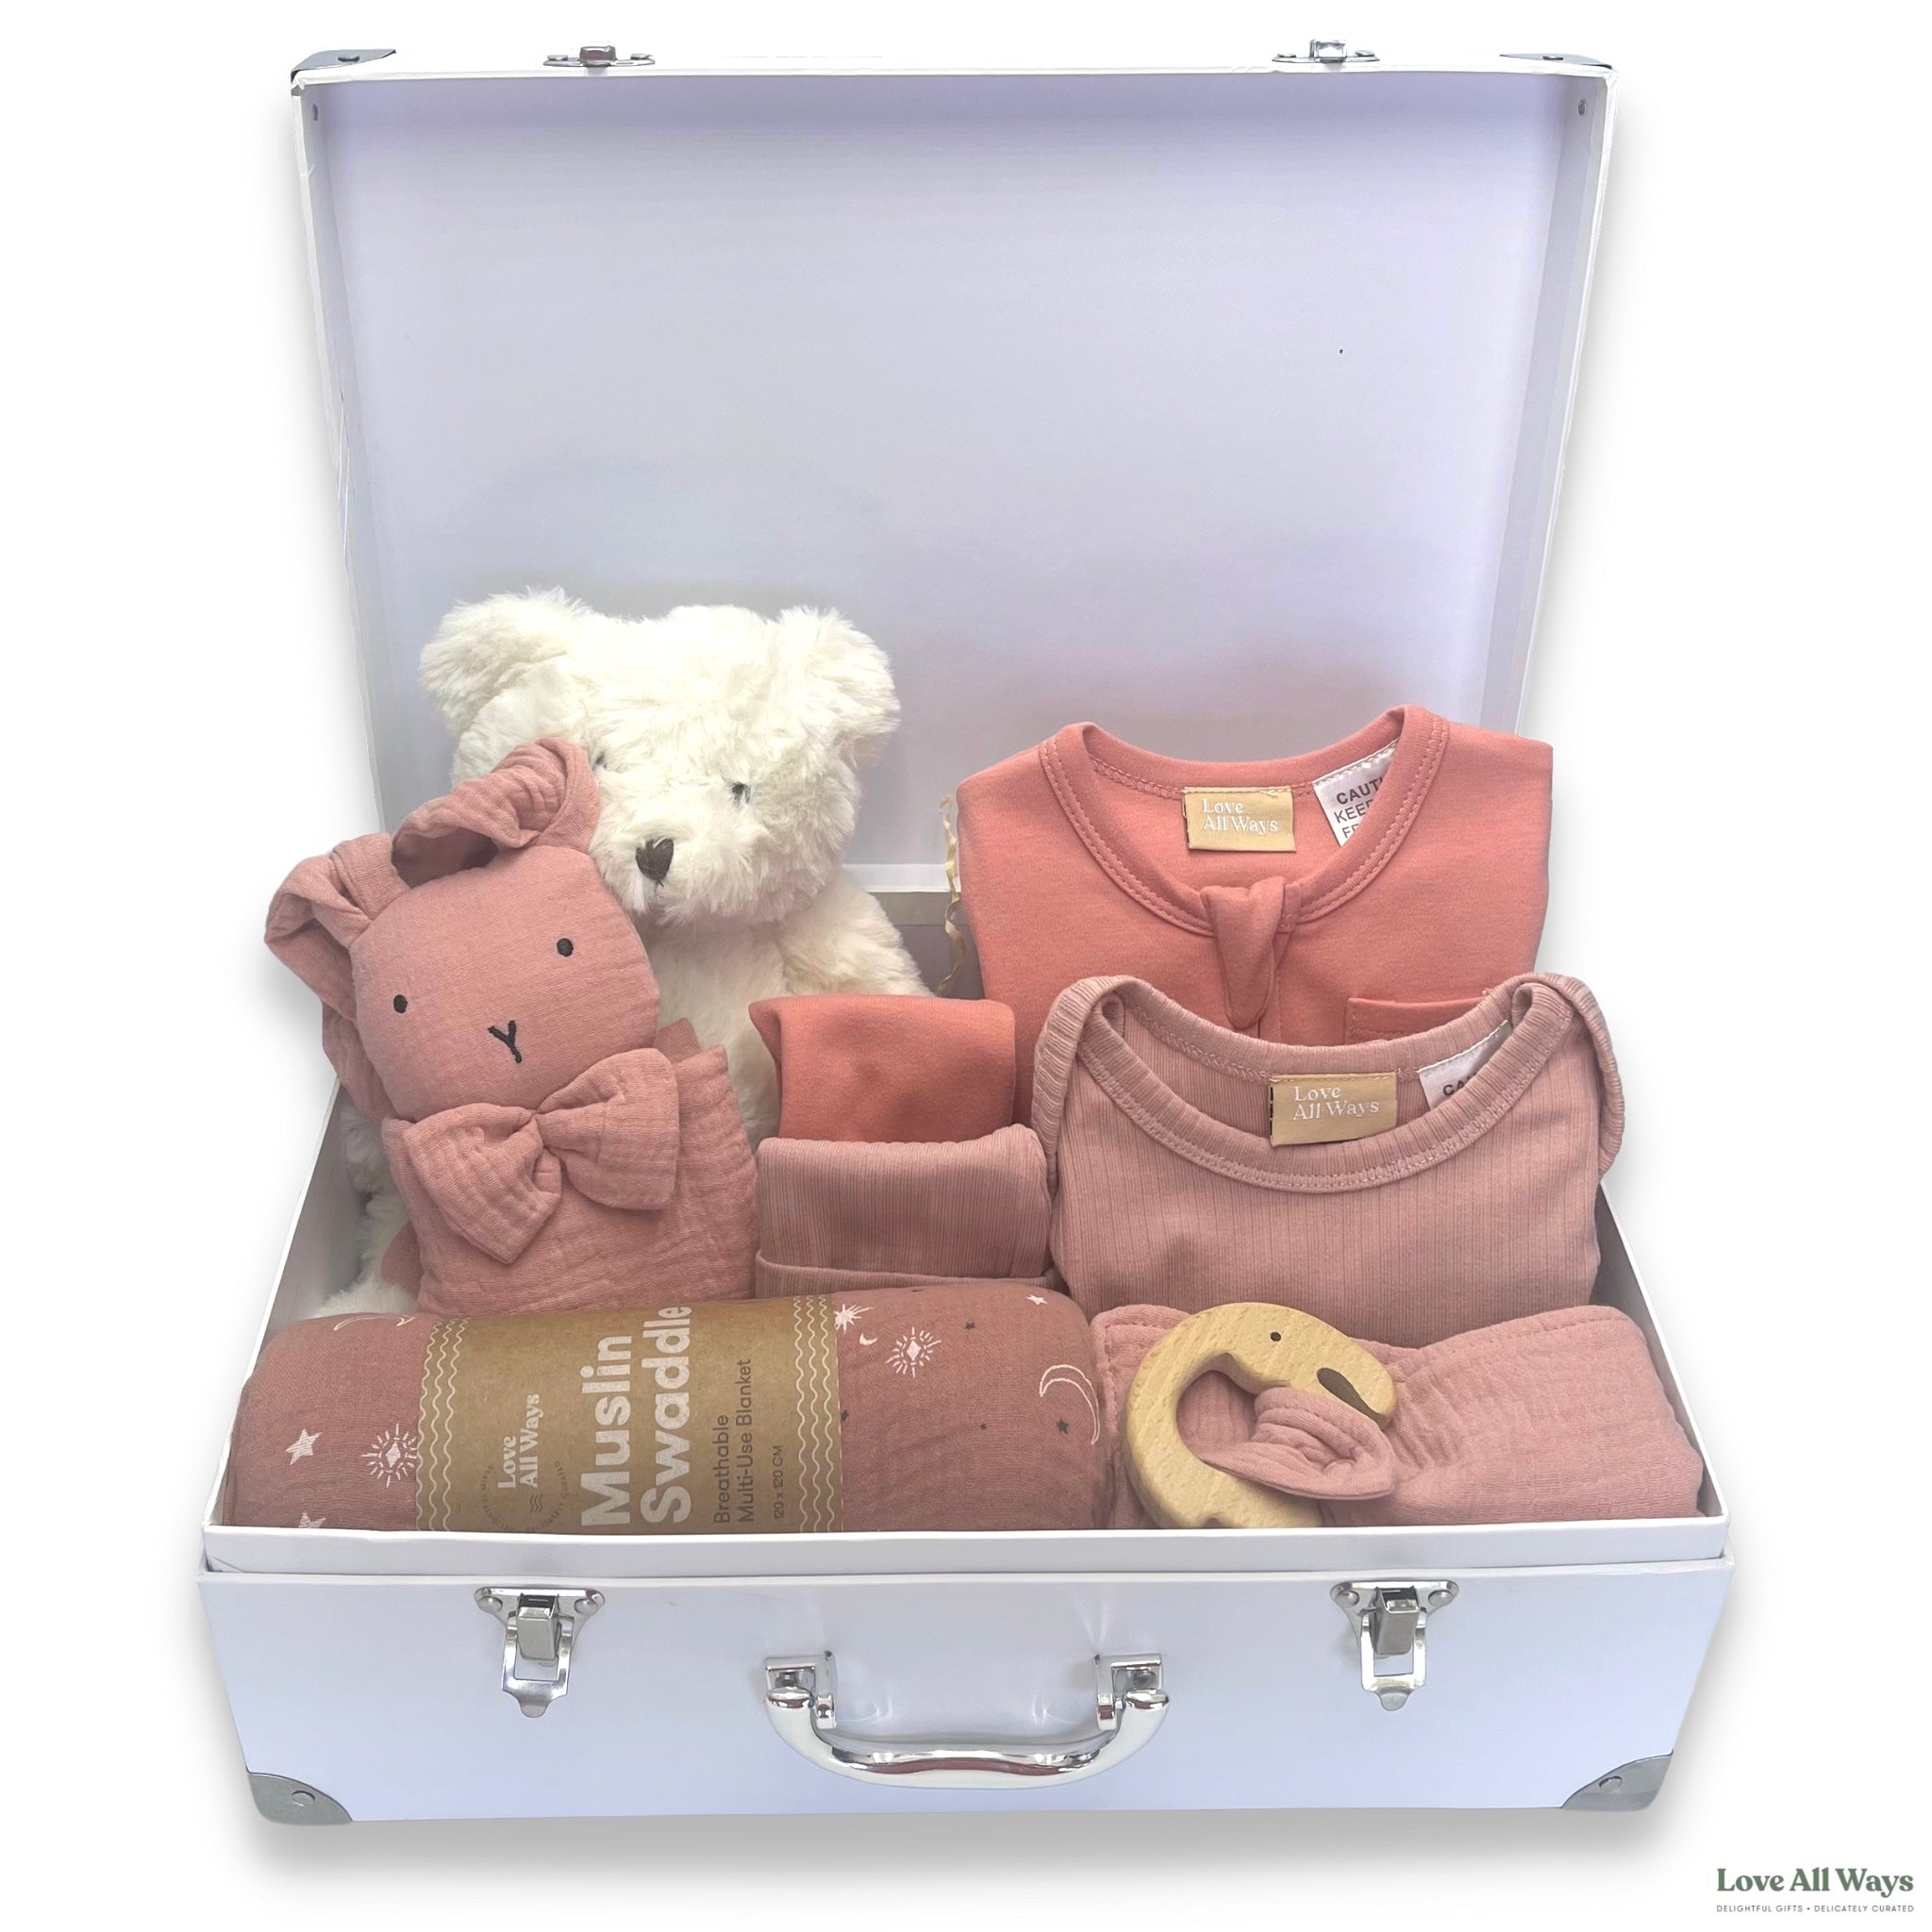 A new baby deserves a Little Indulgence, this beautifully crafted premium baby girl gift hamper comes with exceptional quality organic products delivered free.